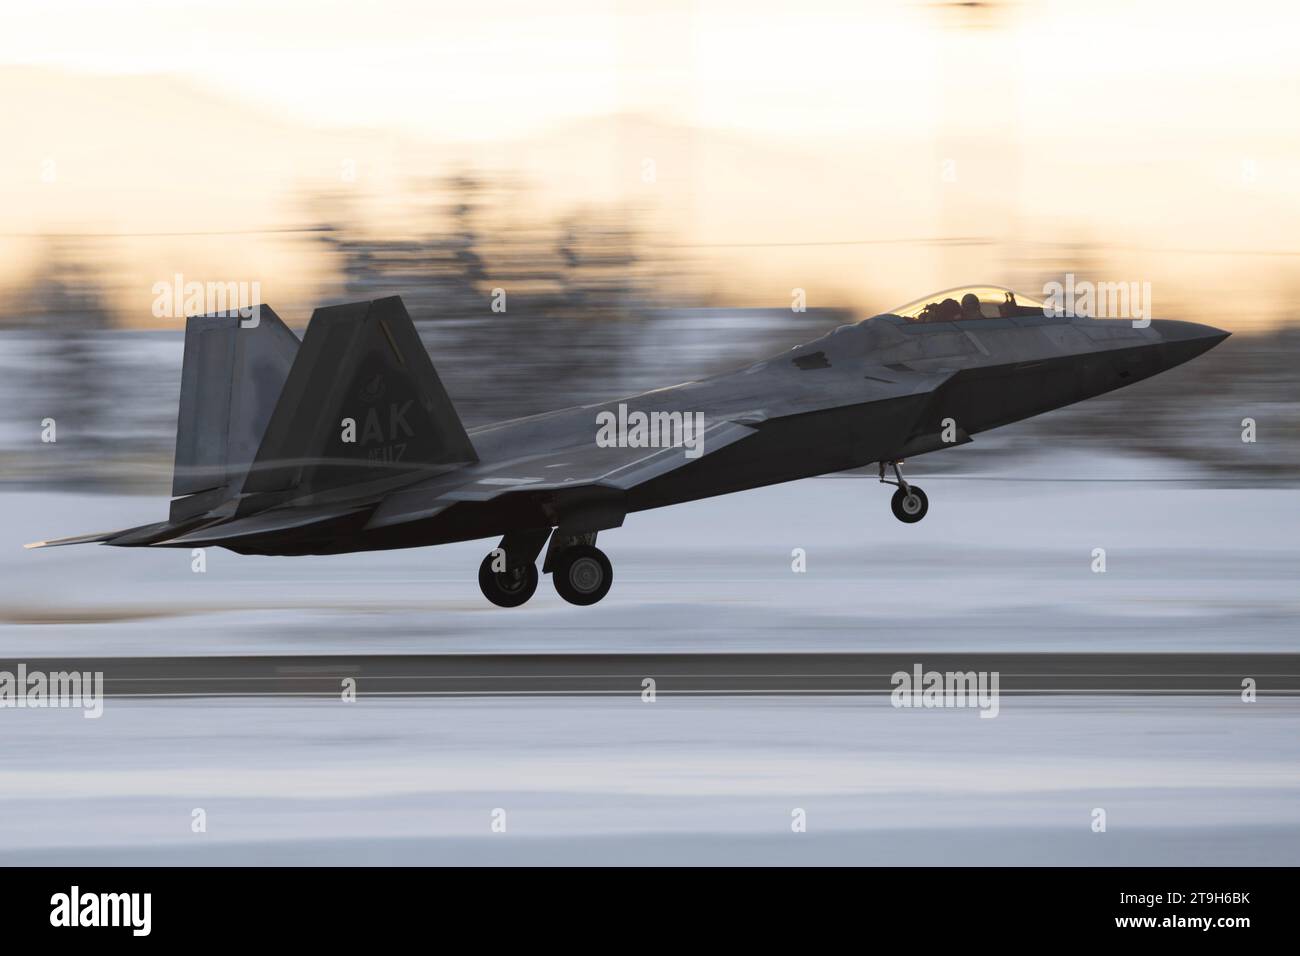 Anchorage, United States. 21 November, 2023. A U.S. Air Force F-22 Raptor fighter aircraft assigned to the 3rd Wing conducts flight operations off a snow cover field at Joint Base Elmendorf-Richardson, November 21, 2023 in Anchorage, Alaska.  Credit: Alejandro Pena/Planetpix/Alamy Live News Stock Photo